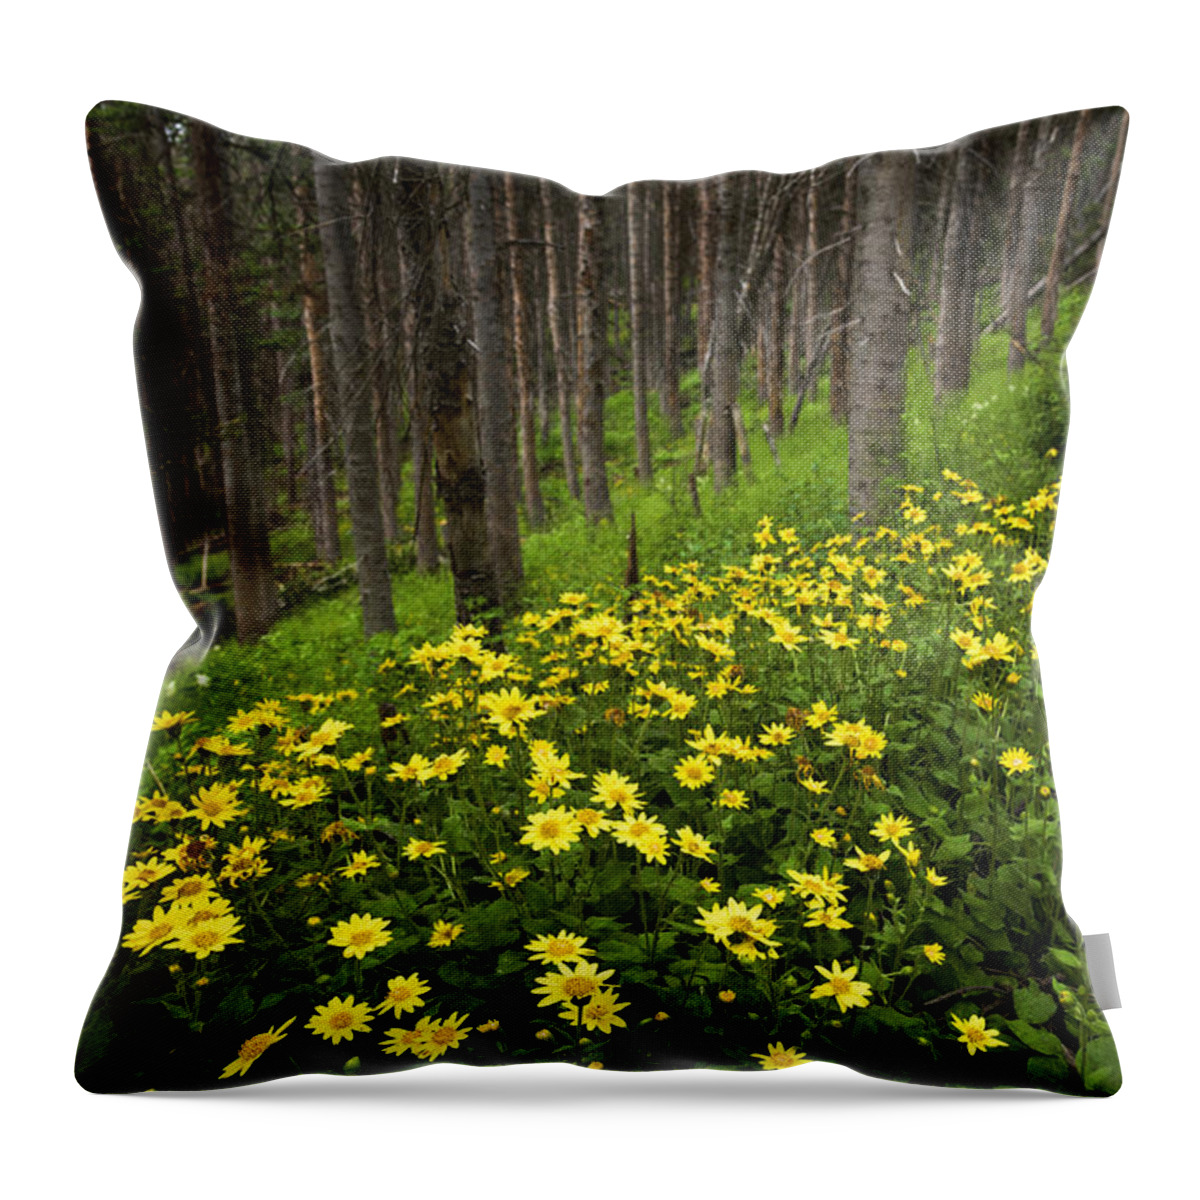 After Throw Pillow featuring the photograph After by Chad Dutson